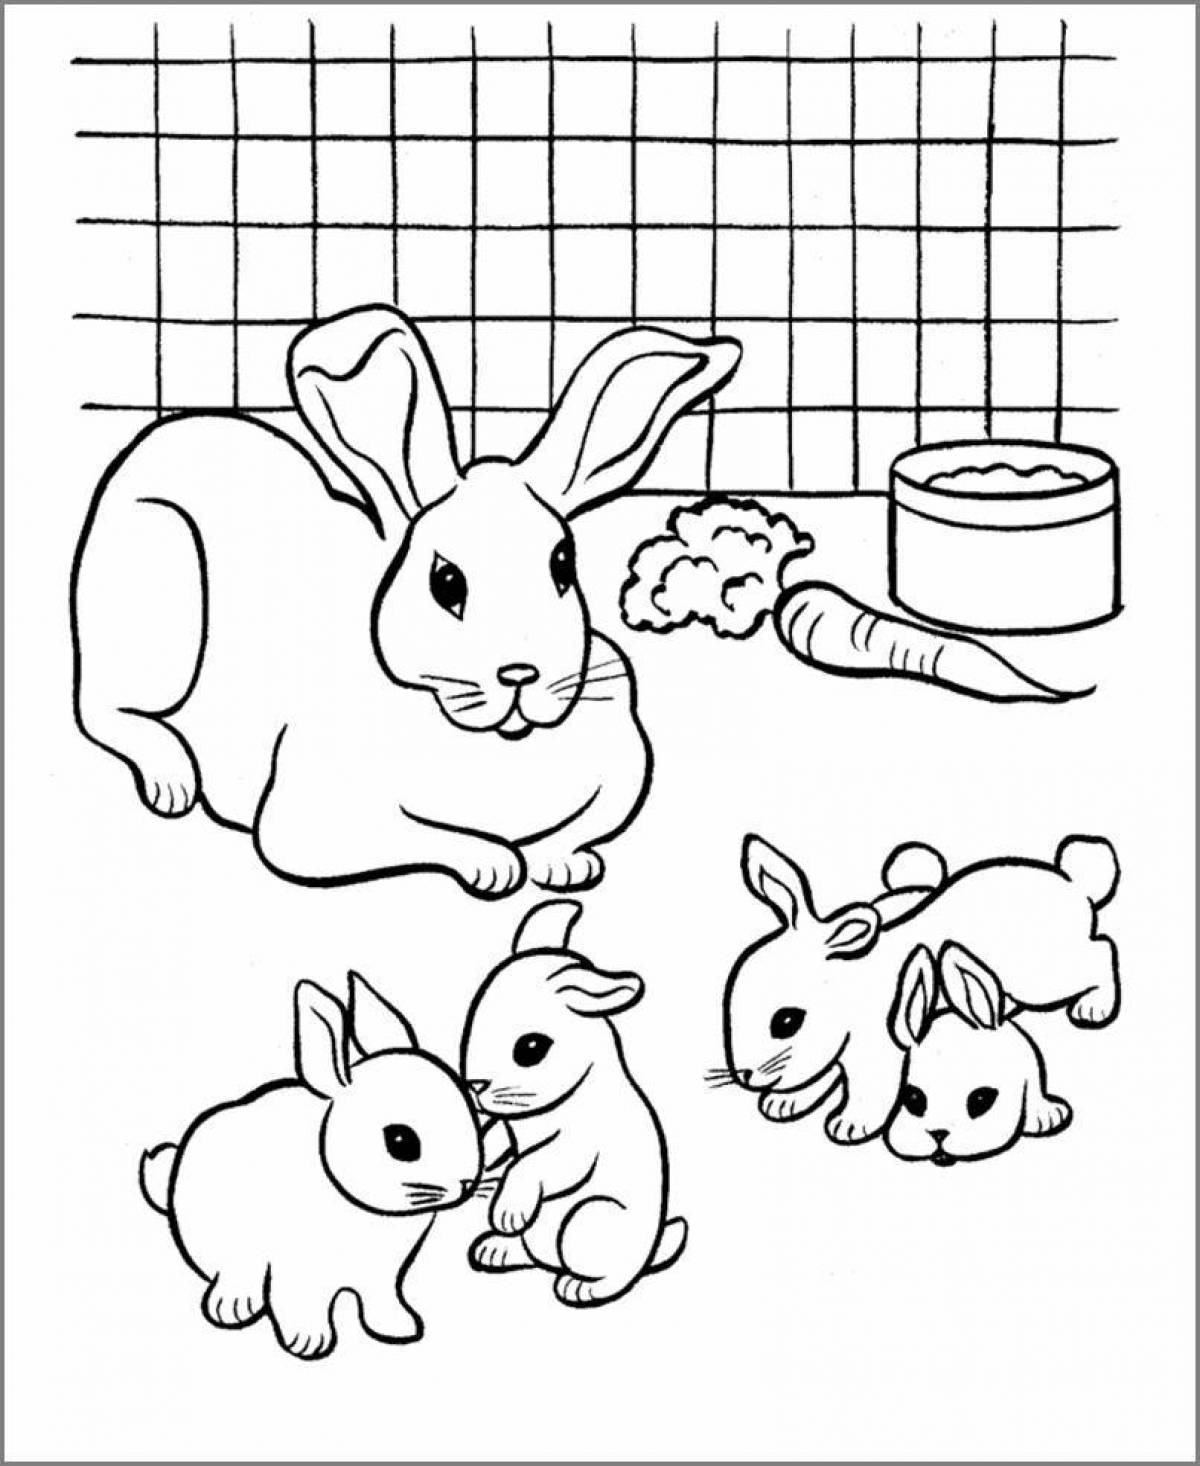 Coloring book shiny year of the rabbit